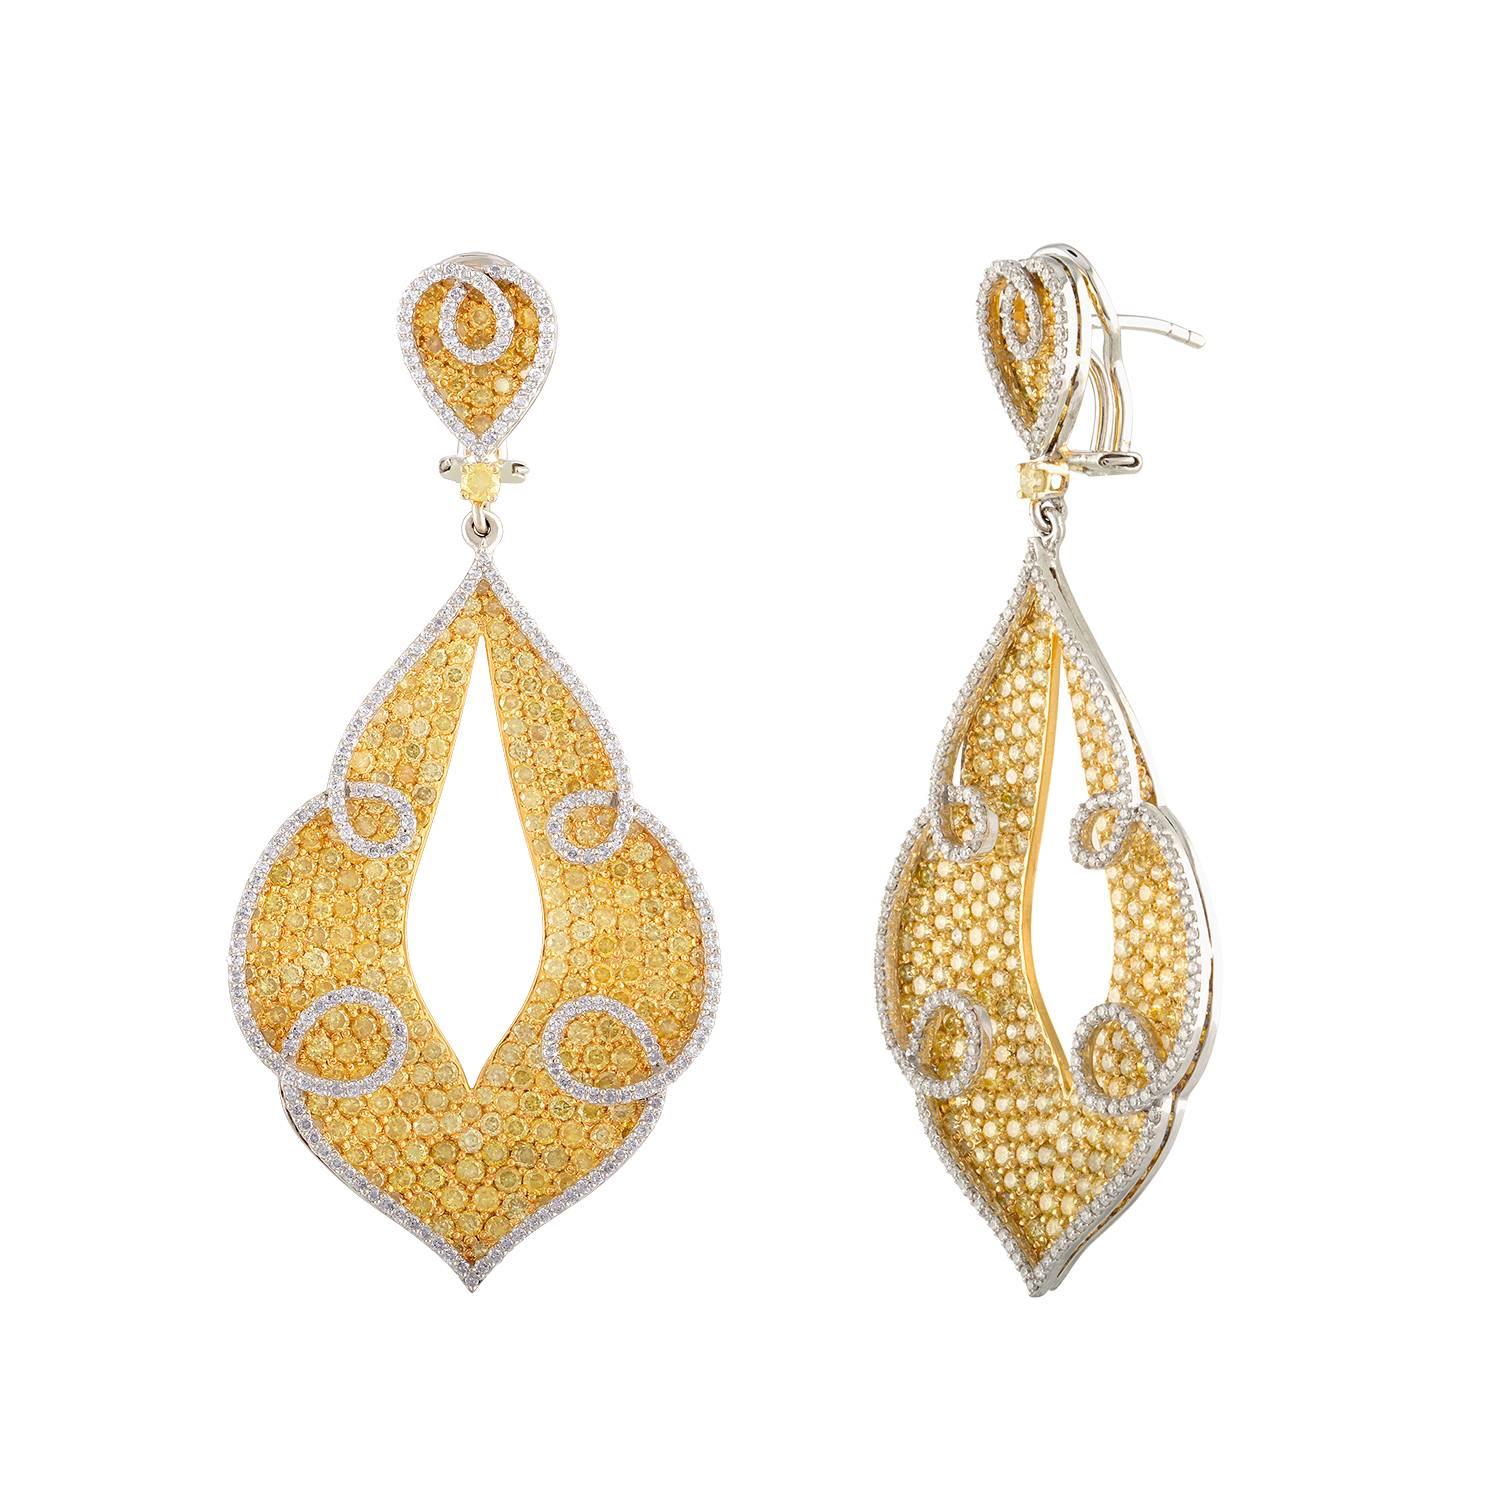 Combination of Two Beautiful Colors - White & Yellow in 18 Karat Yellow Gold & 18 Karat White Gold.
The White Diamonds are set into the White Gold Metal and the Yellow Diamonds are set into the Yellow Gold Metal.
This Dangling Earrings are 2 1/2